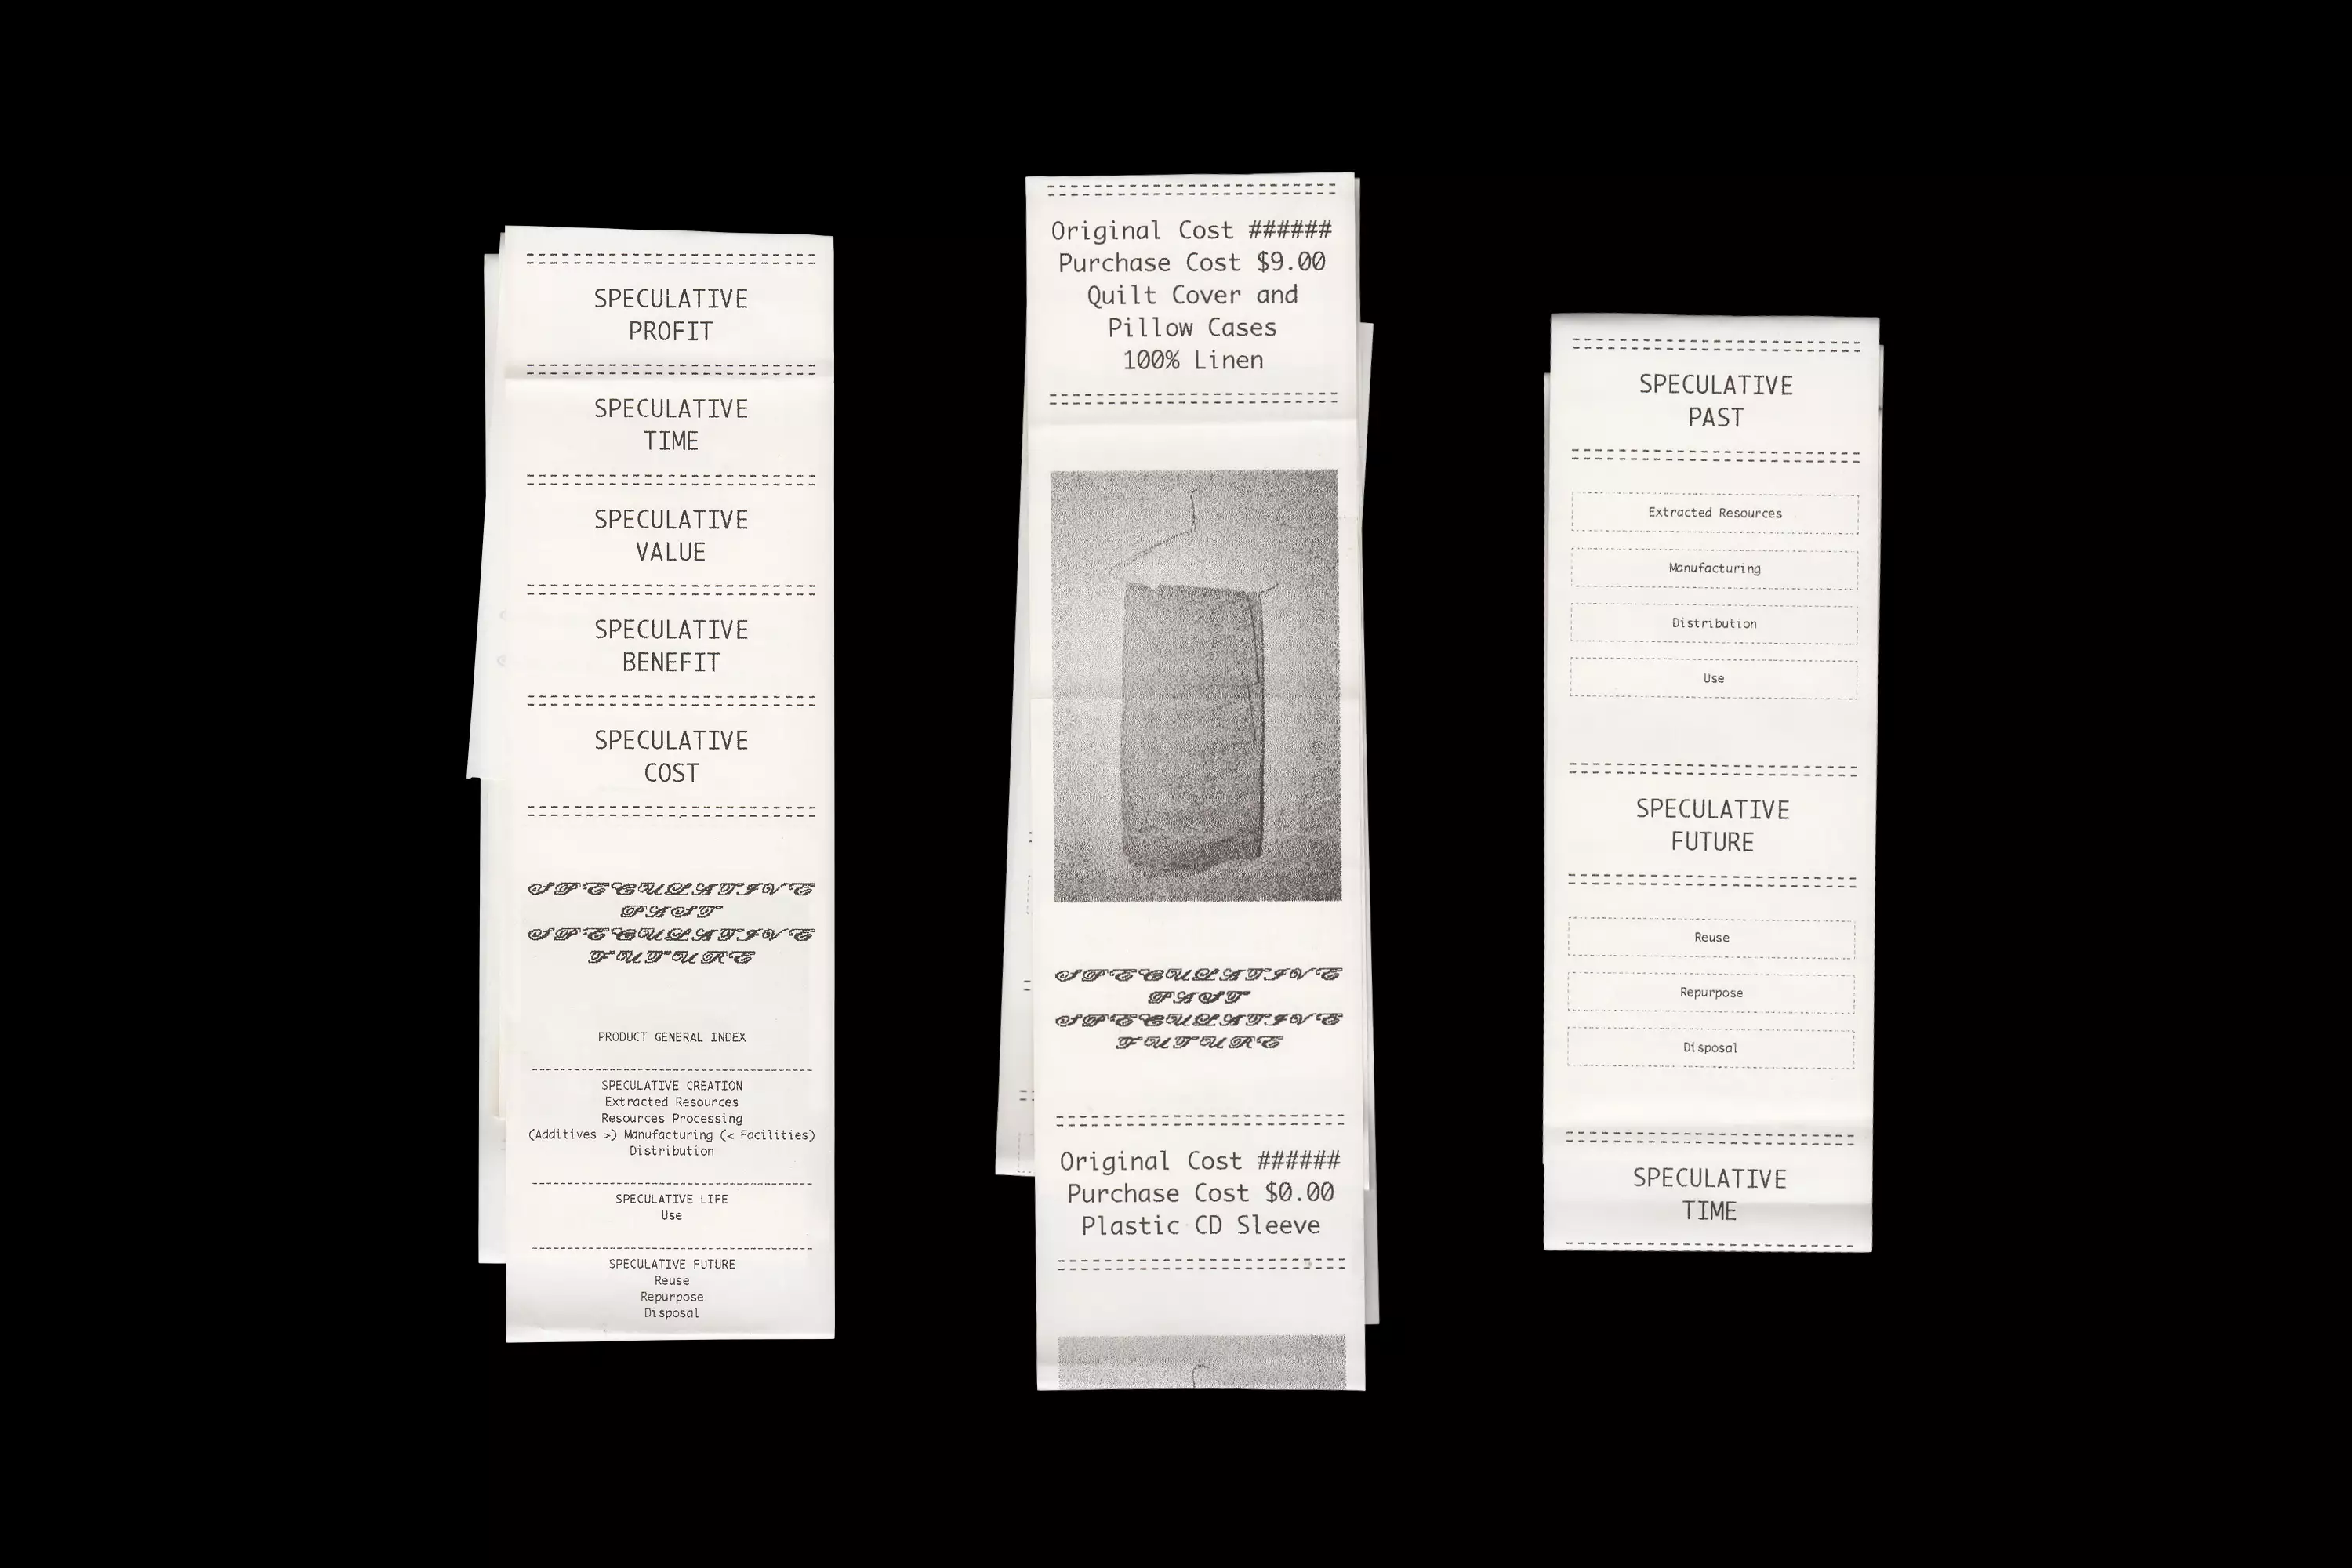 Three receipts against a black background depicting clothing life cycle research.